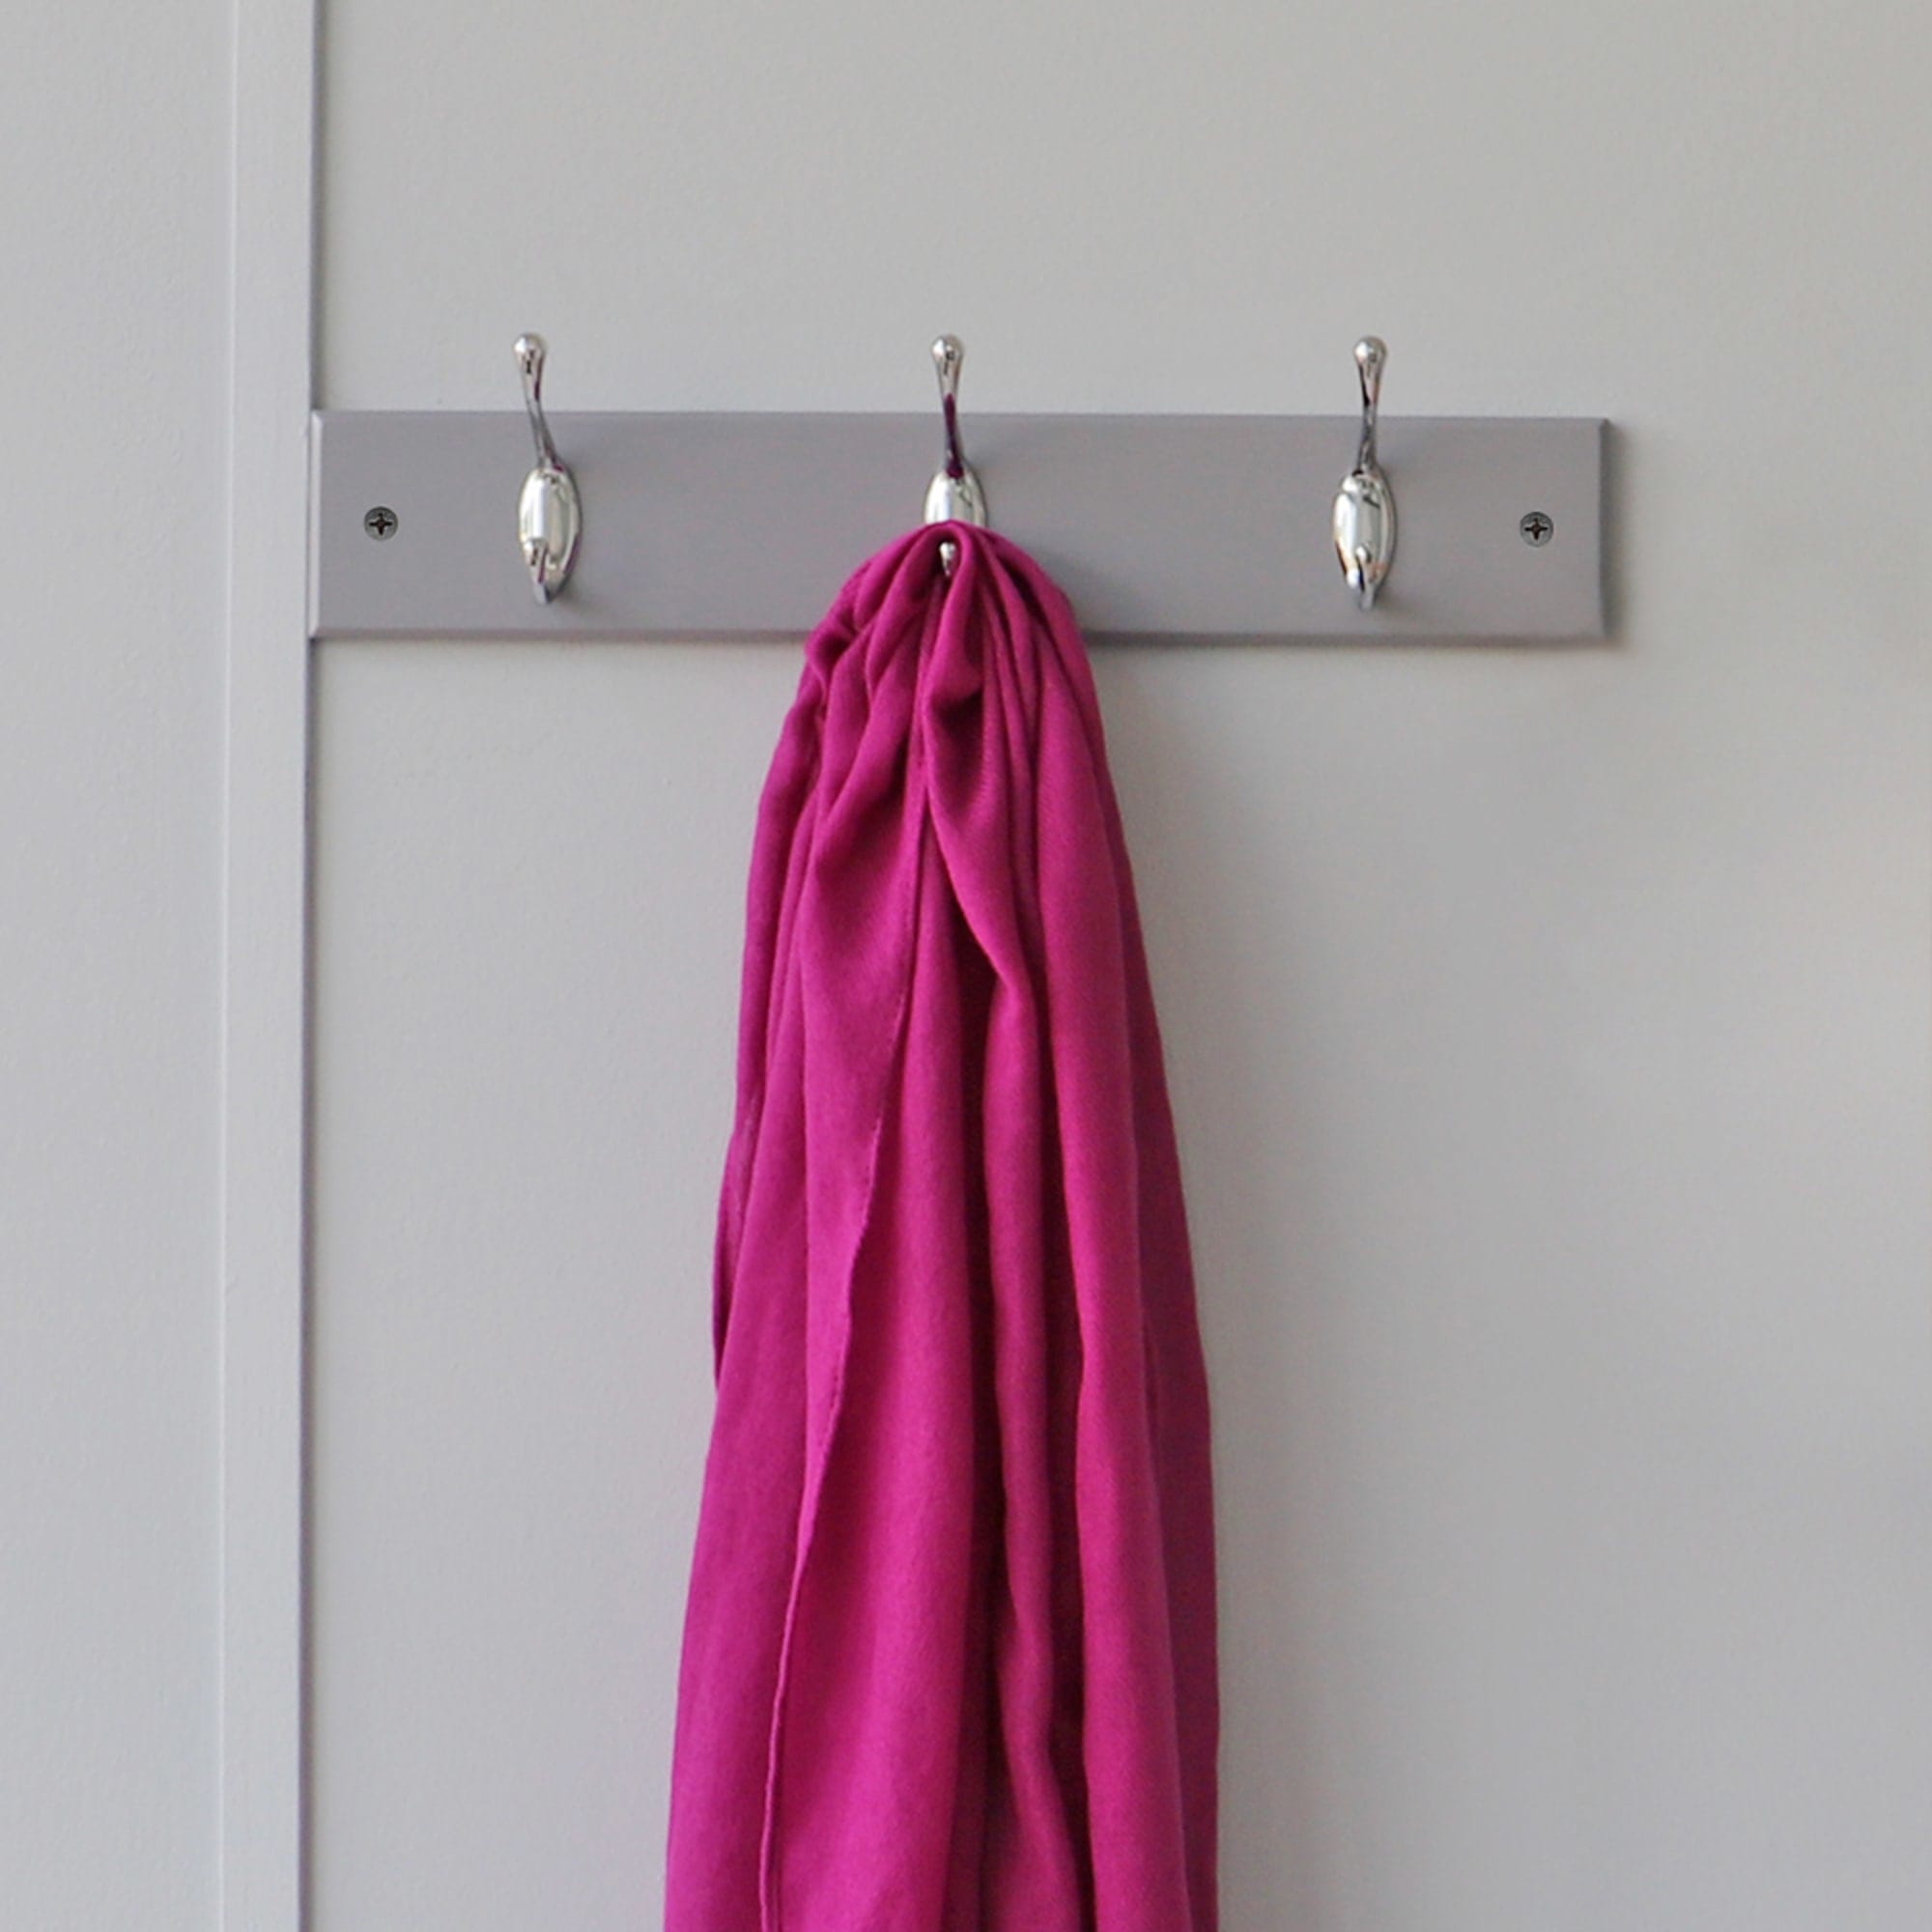 Home Basics 3 Double Hook Wall Mounted Hanging Rack, Grey $8.00 EACH, CASE PACK OF 12